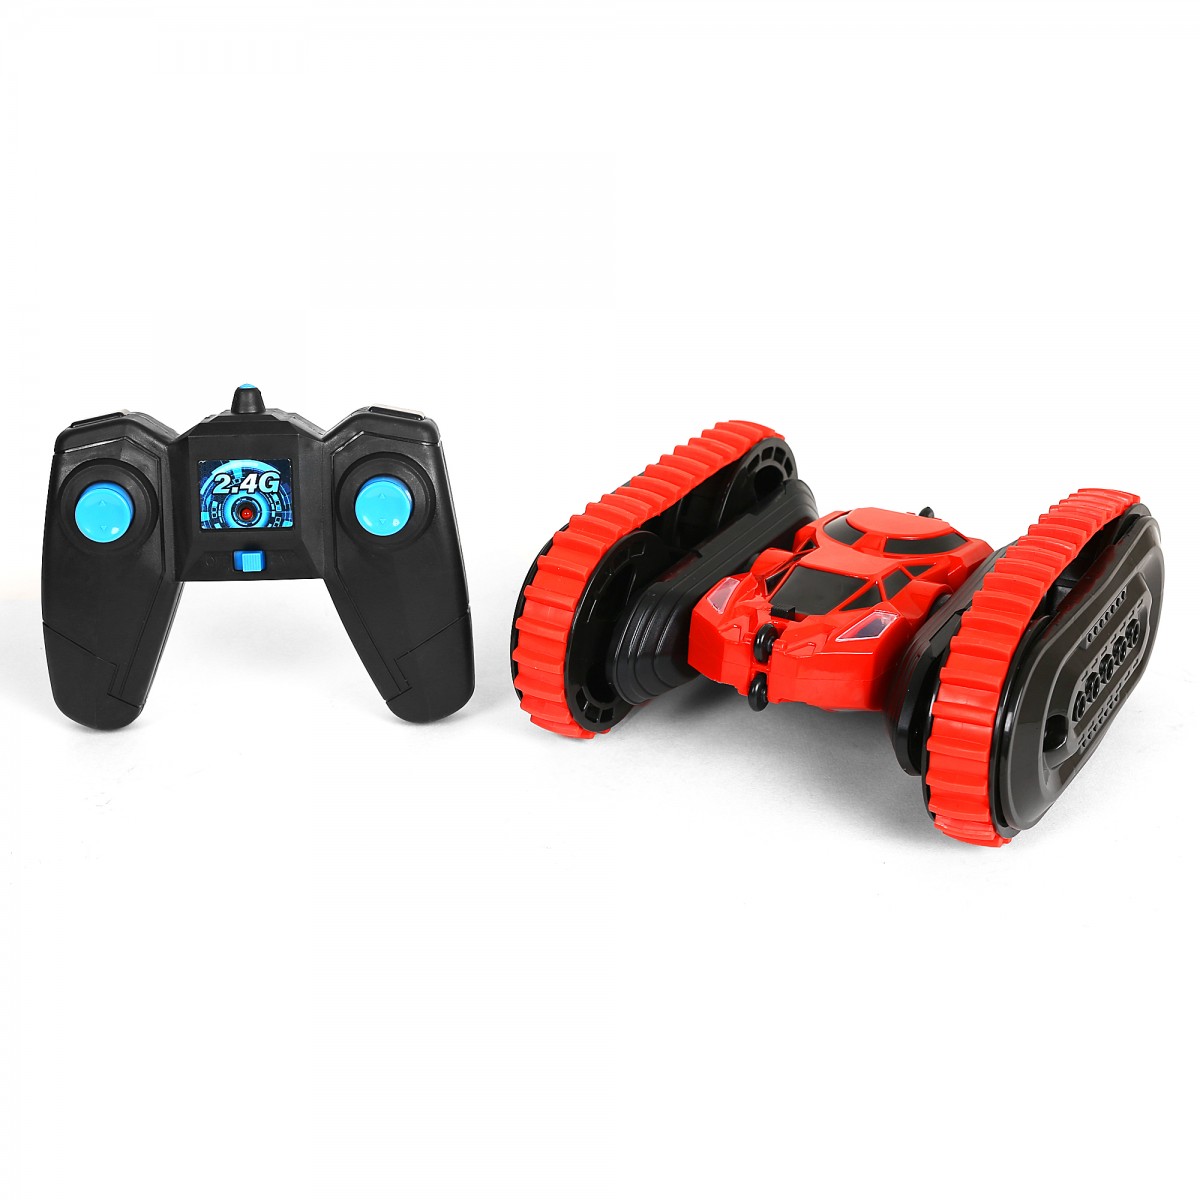 Ralleyz 2.4G 2 In1 Remote Control Stunt Car, Changeable Wheels With Charger, Red, 6Y+